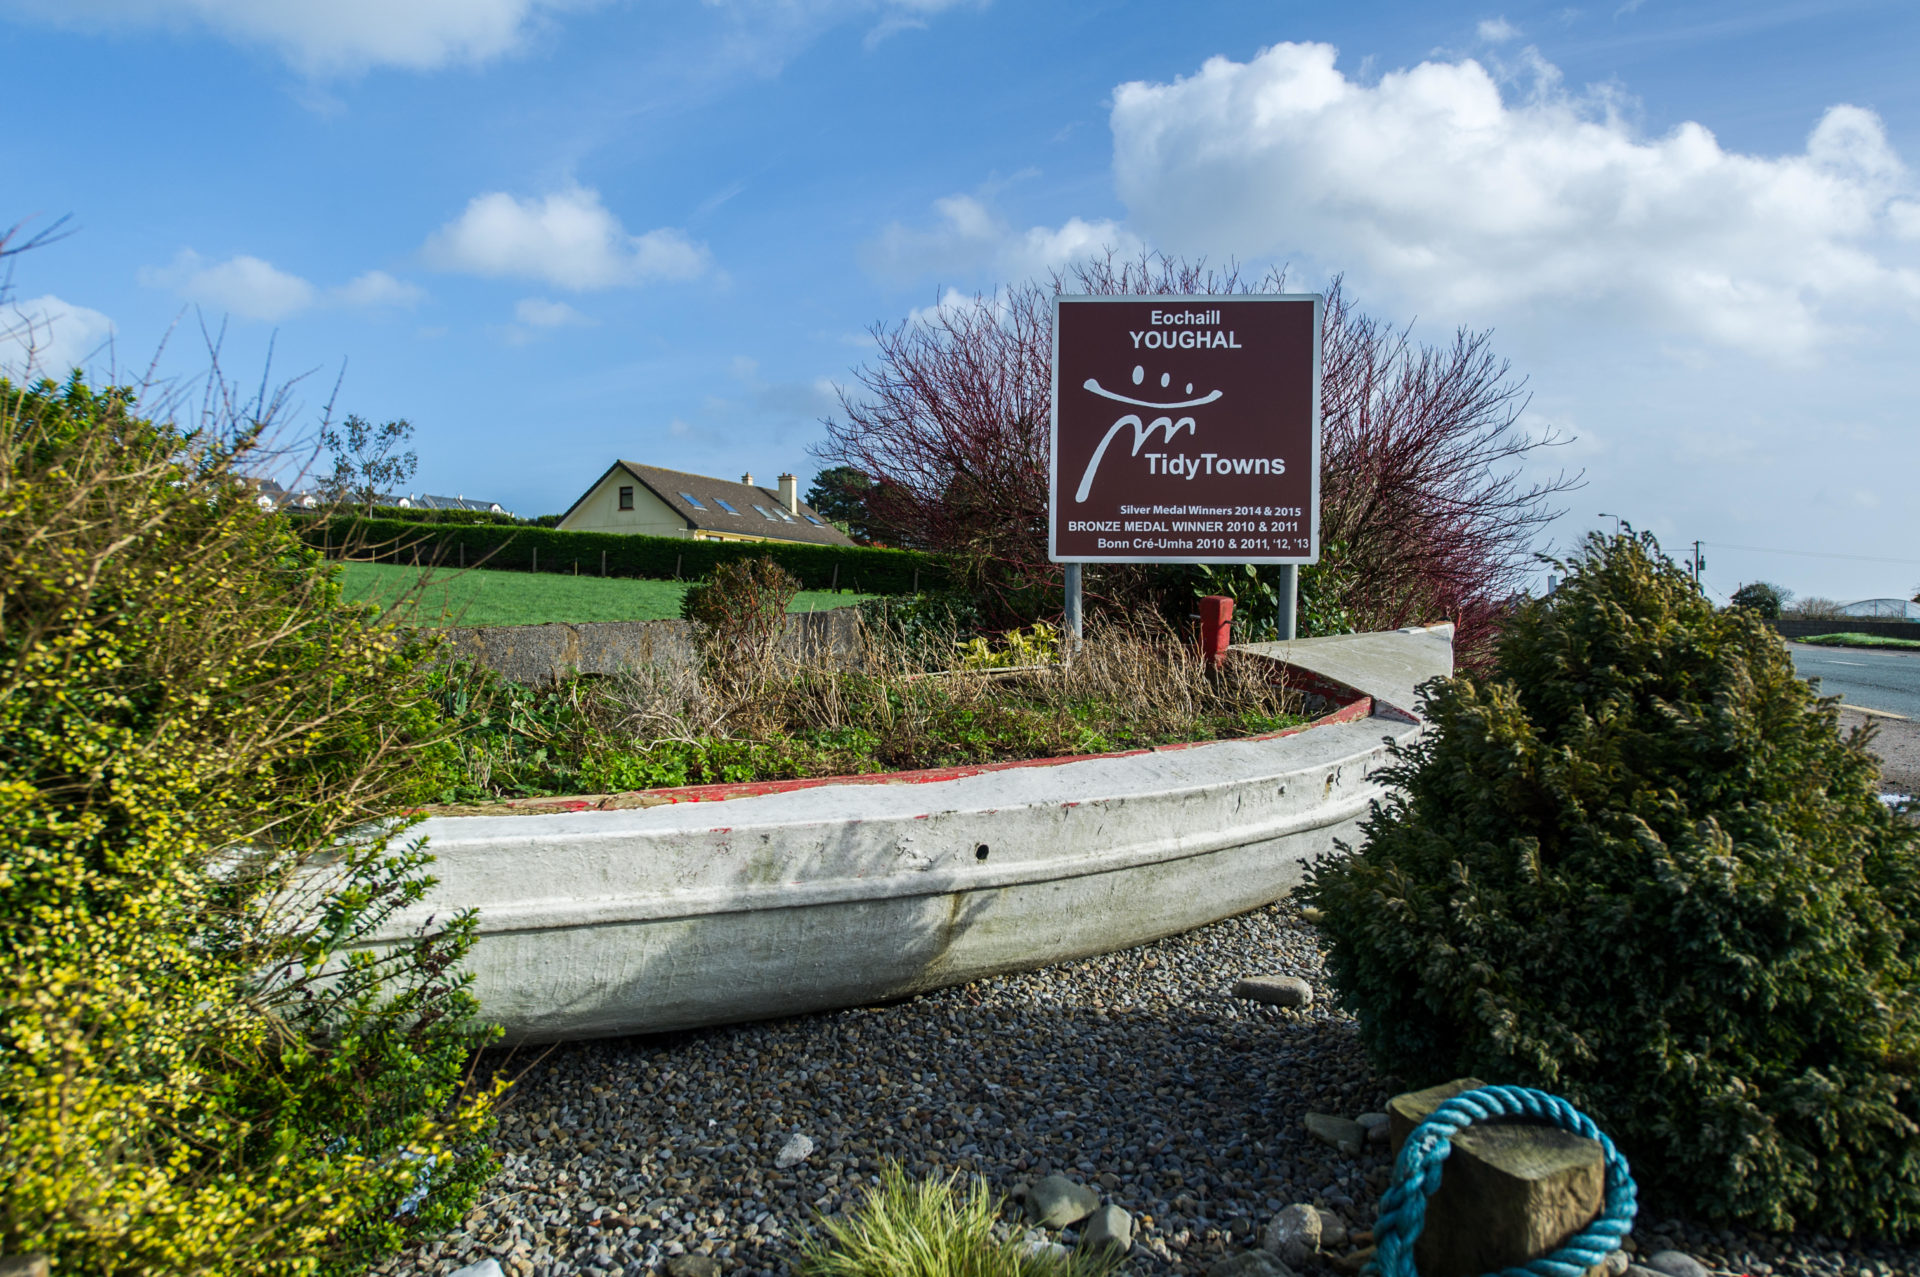 The Youghal Tidy Towns sign with a boat. Image: Andy Gibson / Alamy Stock Photo 